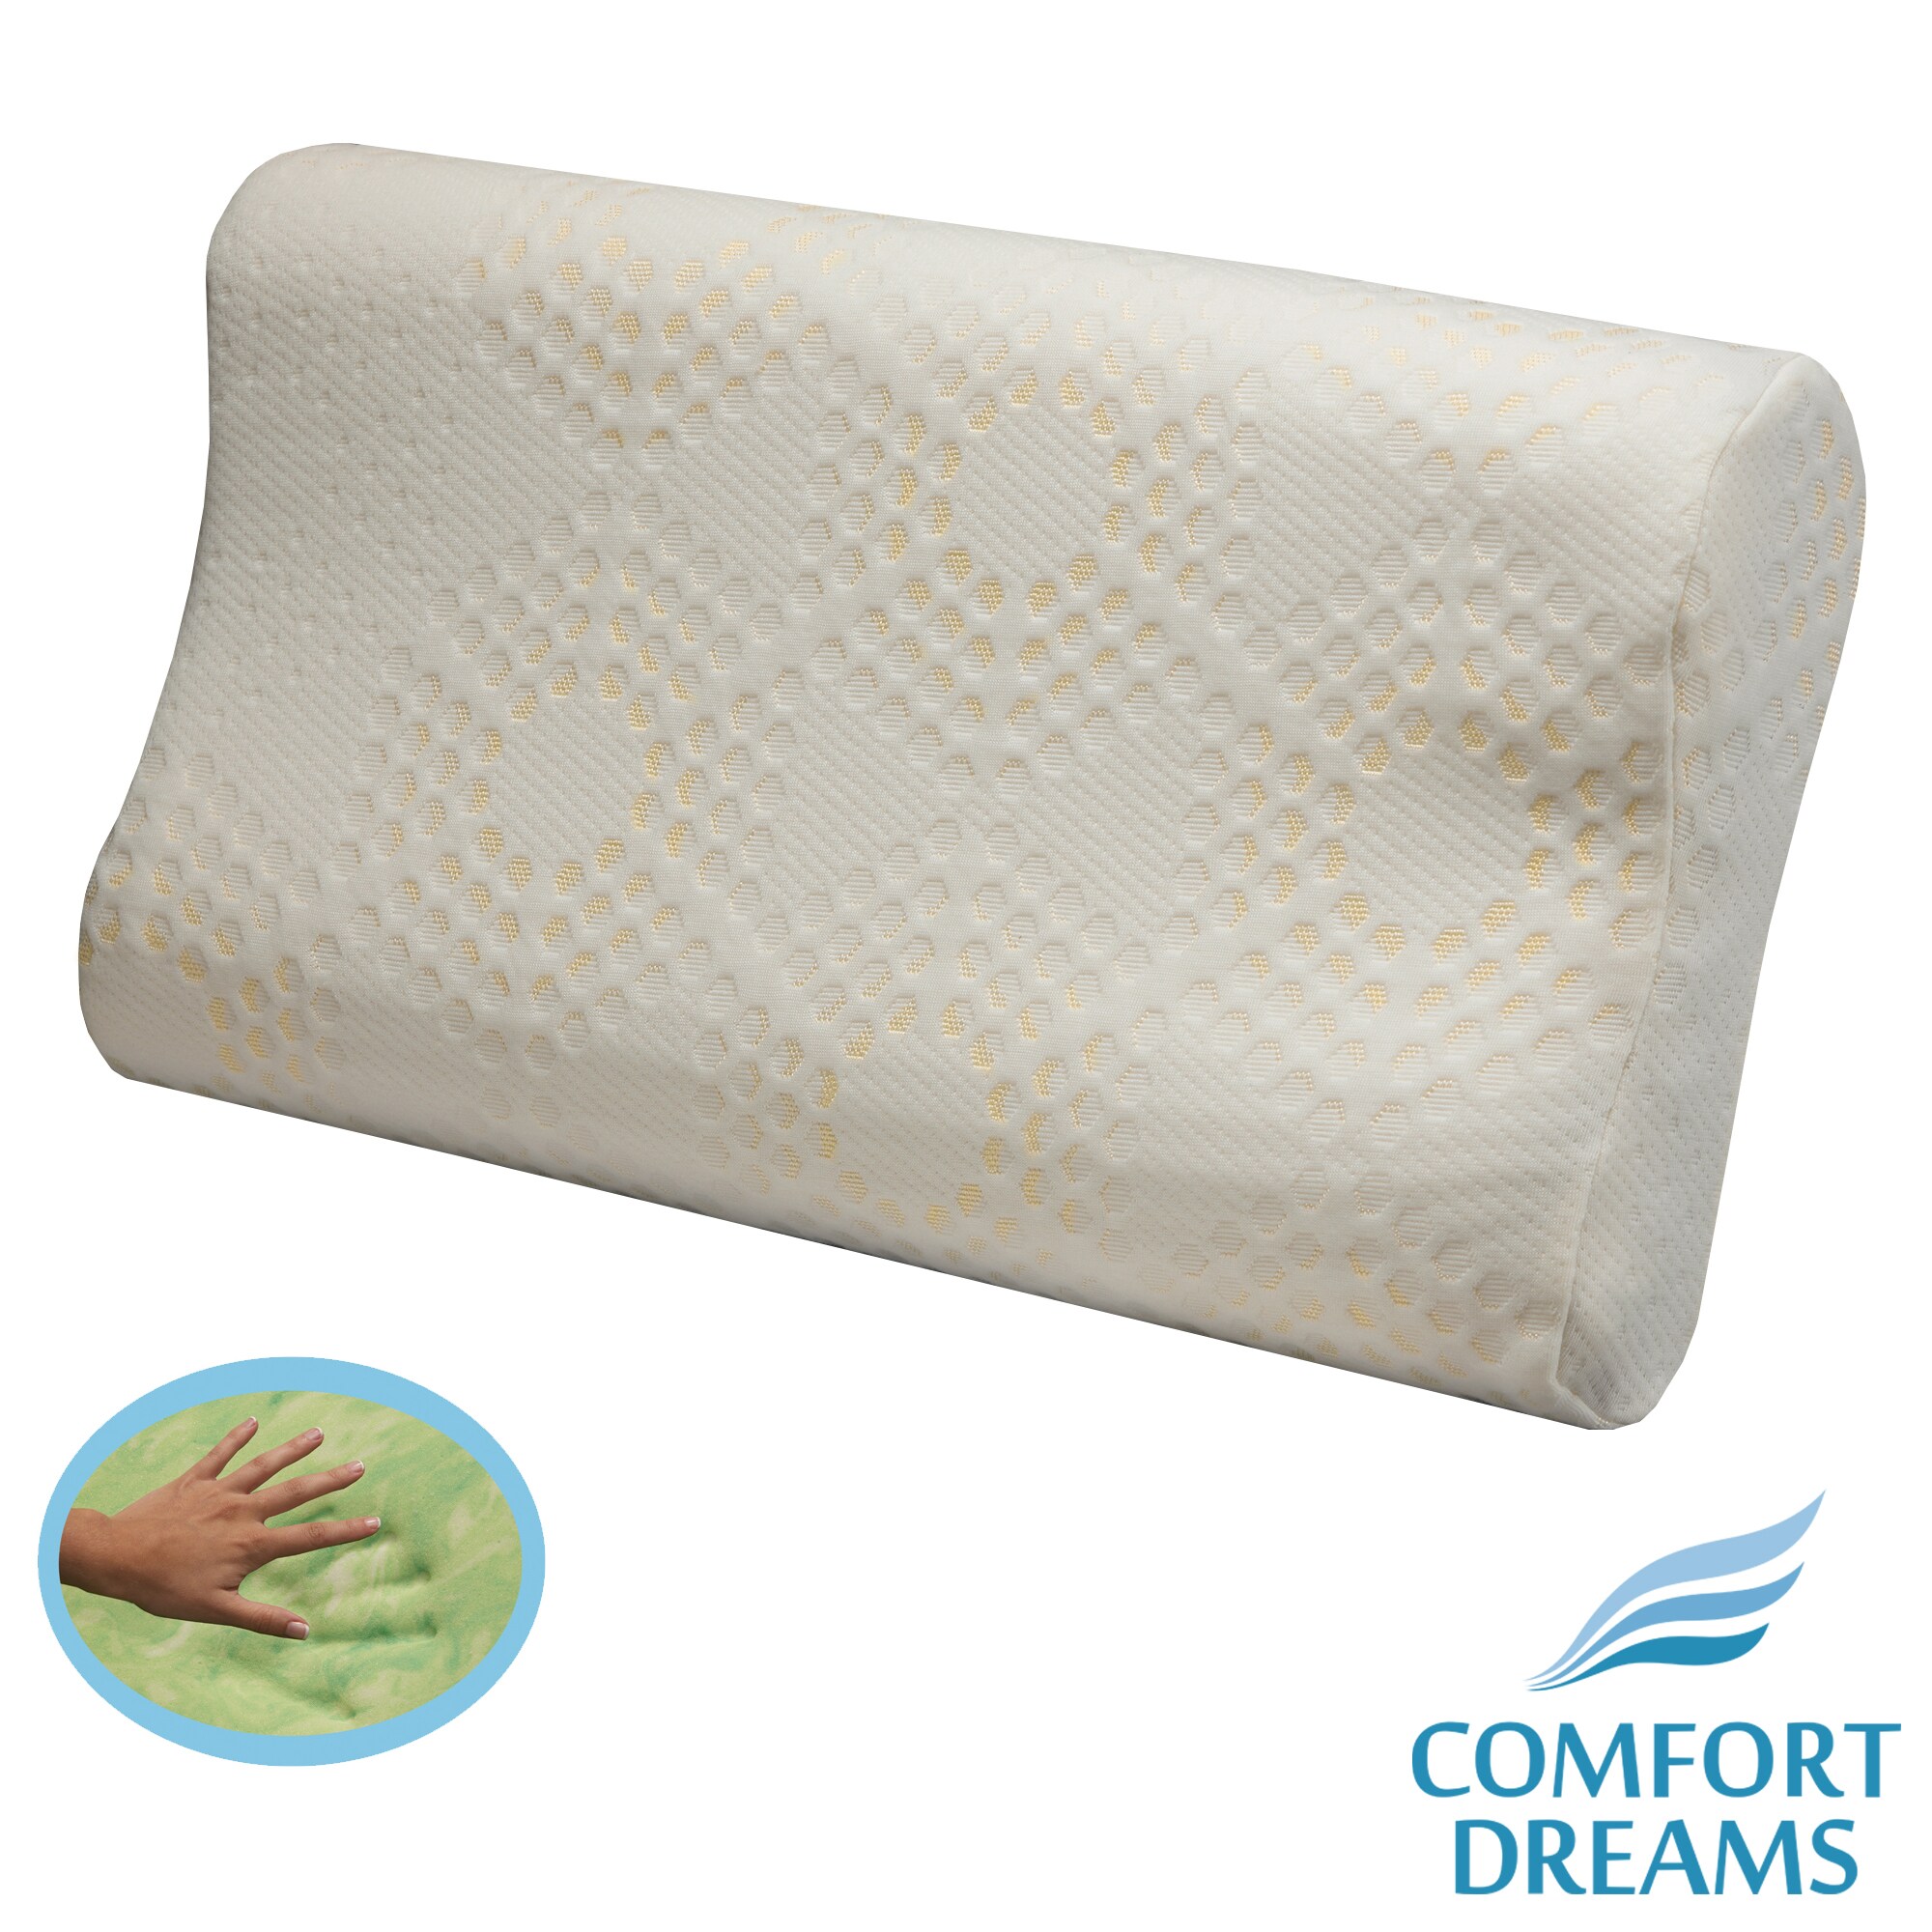 Comfort Dreams Lifestyle Collection Relief Gel infused Memory Foam Pillow